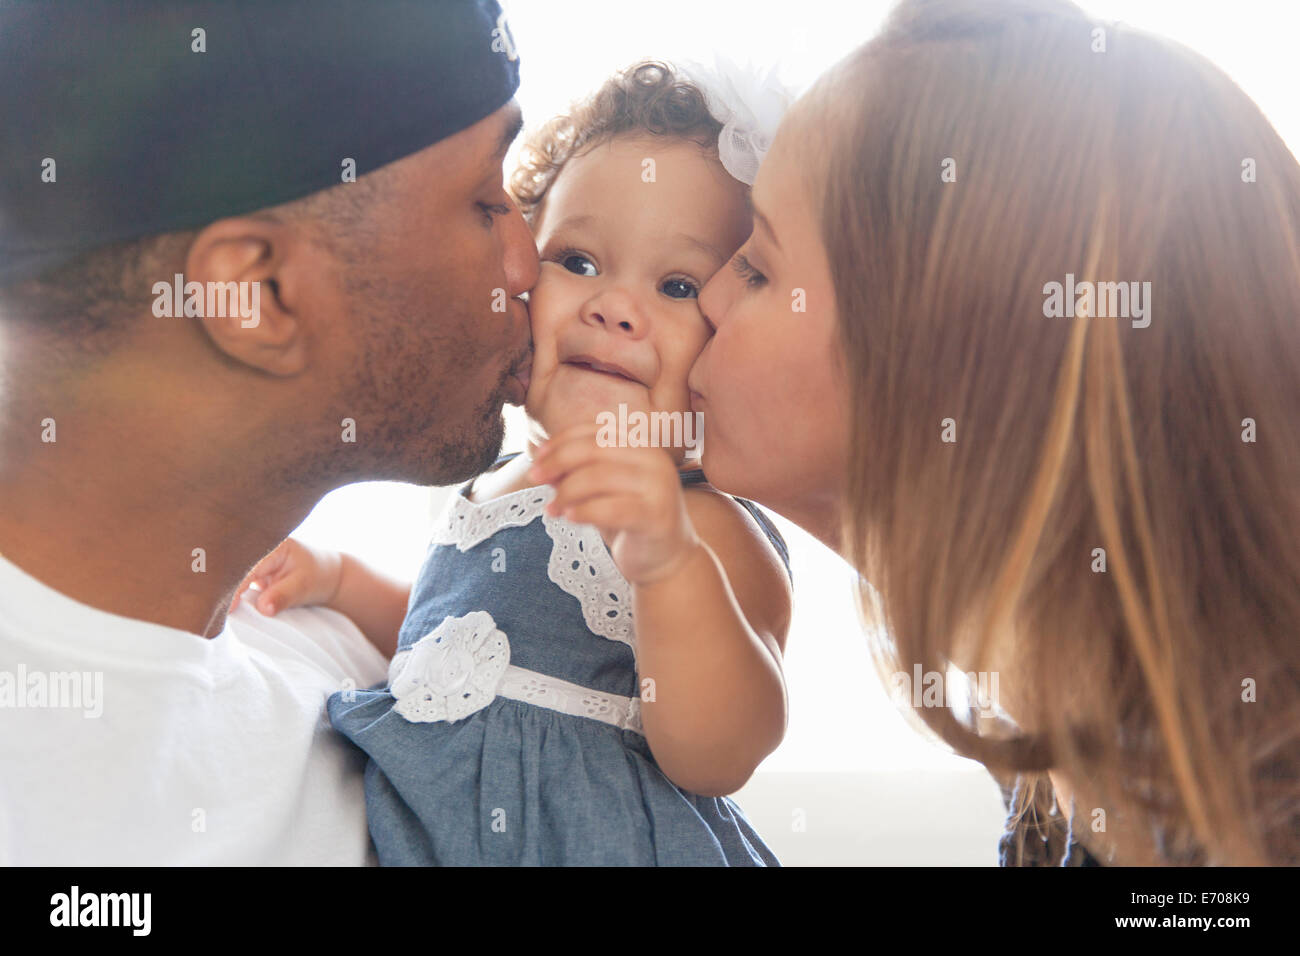 Mother and father kissing young daughter on cheeks Stock Photo